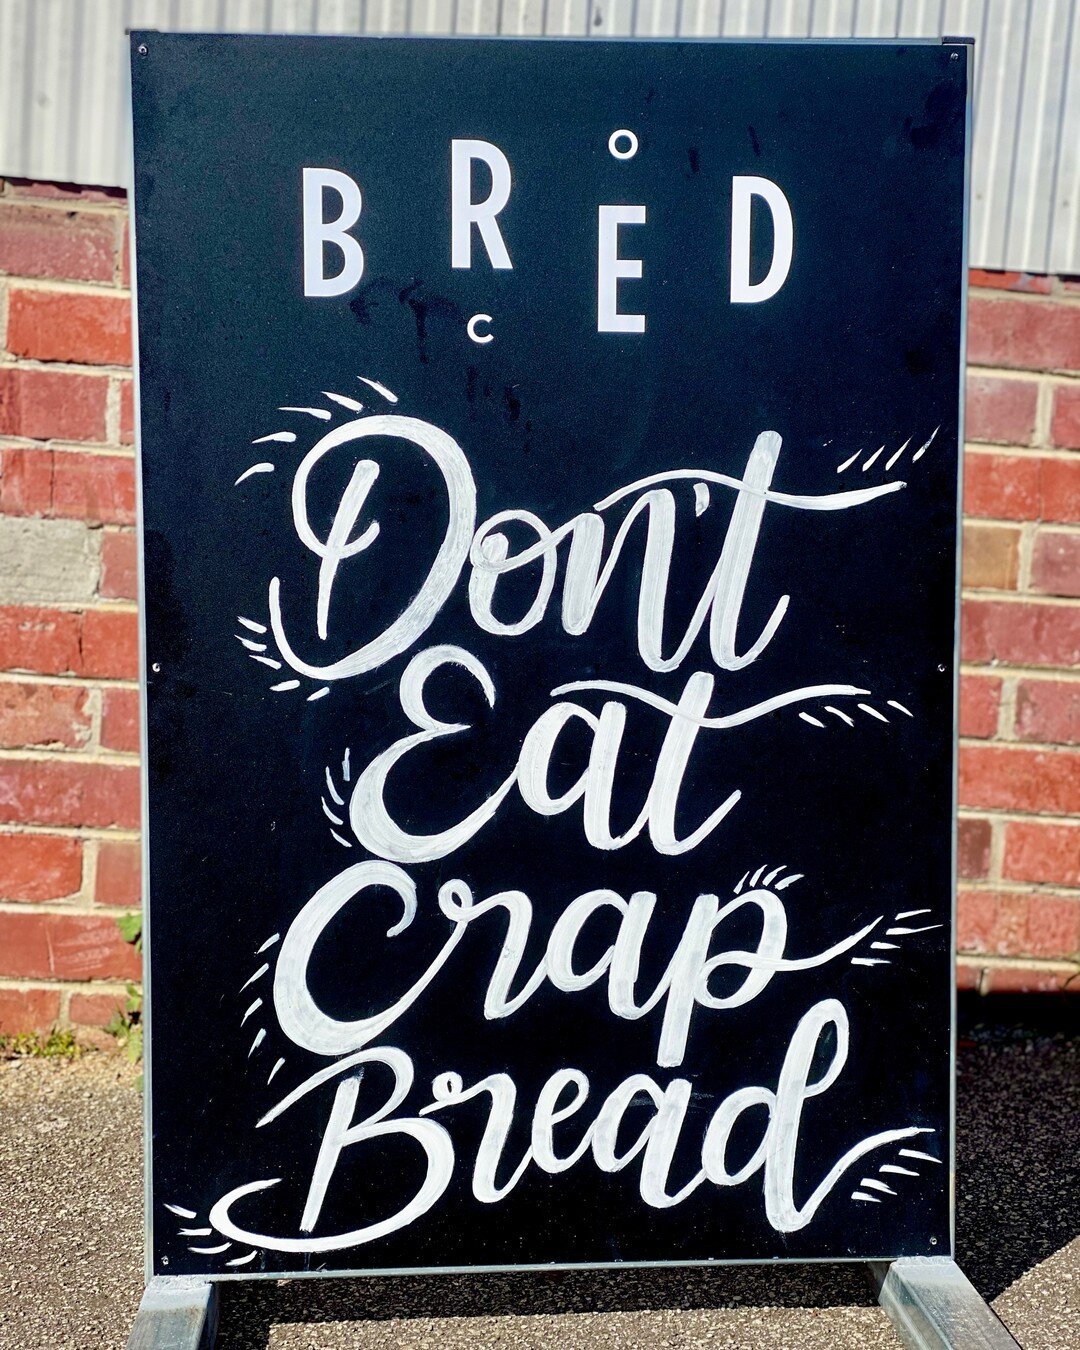 We&rsquo;ve got you covered! All your favourites and fresh handmade pasta at @albanyfarmersmarket from 8am! See you in the sunshine! ☀️​​​​​​​​
​​​​​​​​
​​​​​​​​
​​​​​​​​
#betterbread #bredco #bredbread #albany #sustainable #artisanbread #lovacore #s